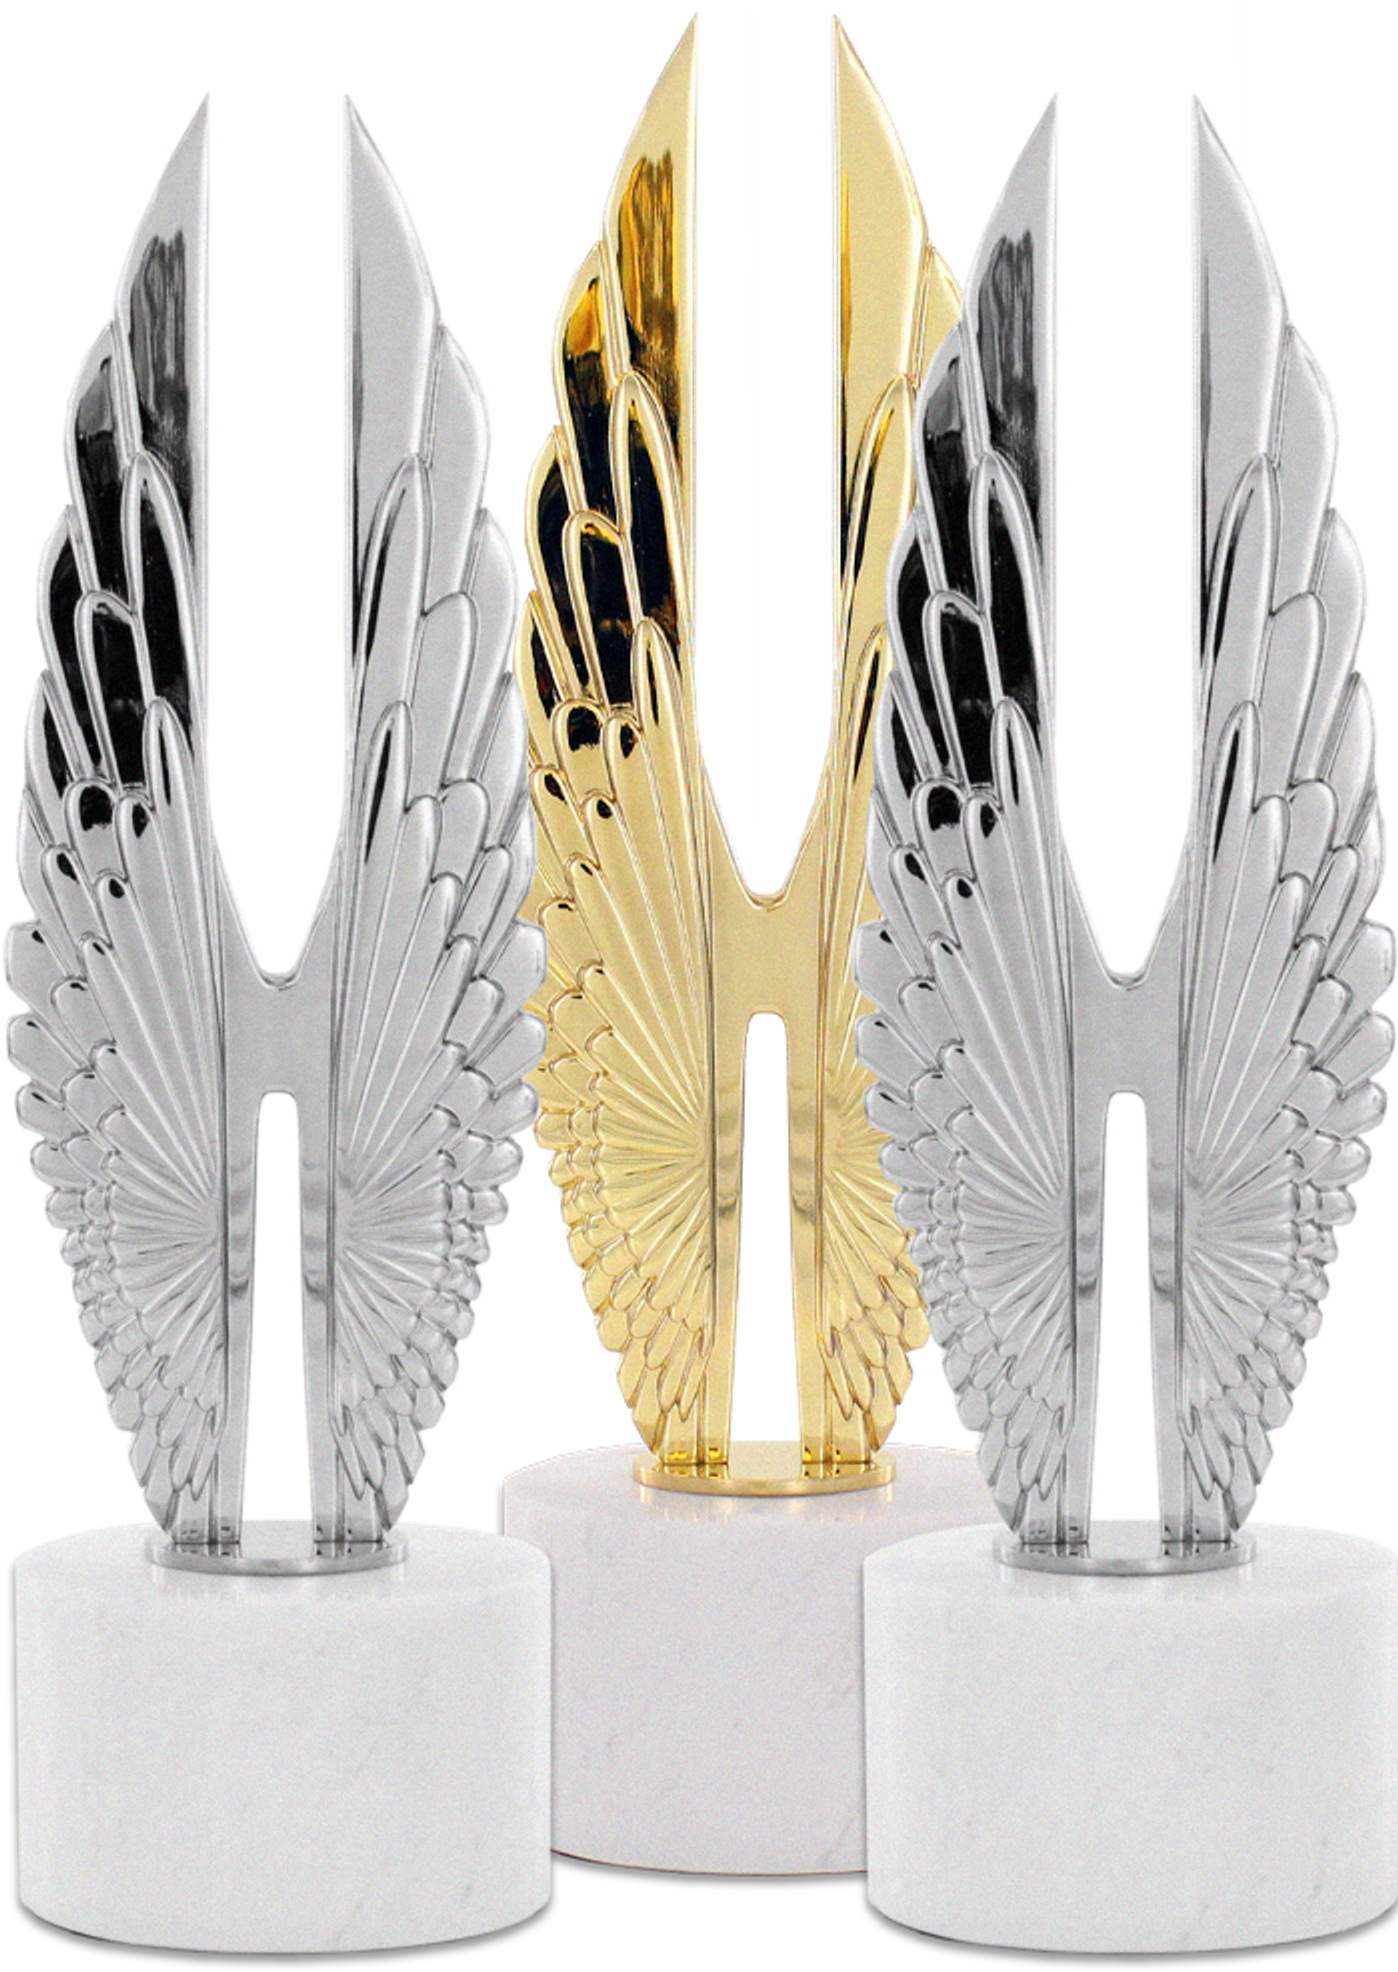 Three wing-shaped trophies, with the central one gold and the others silver, on marble bases.